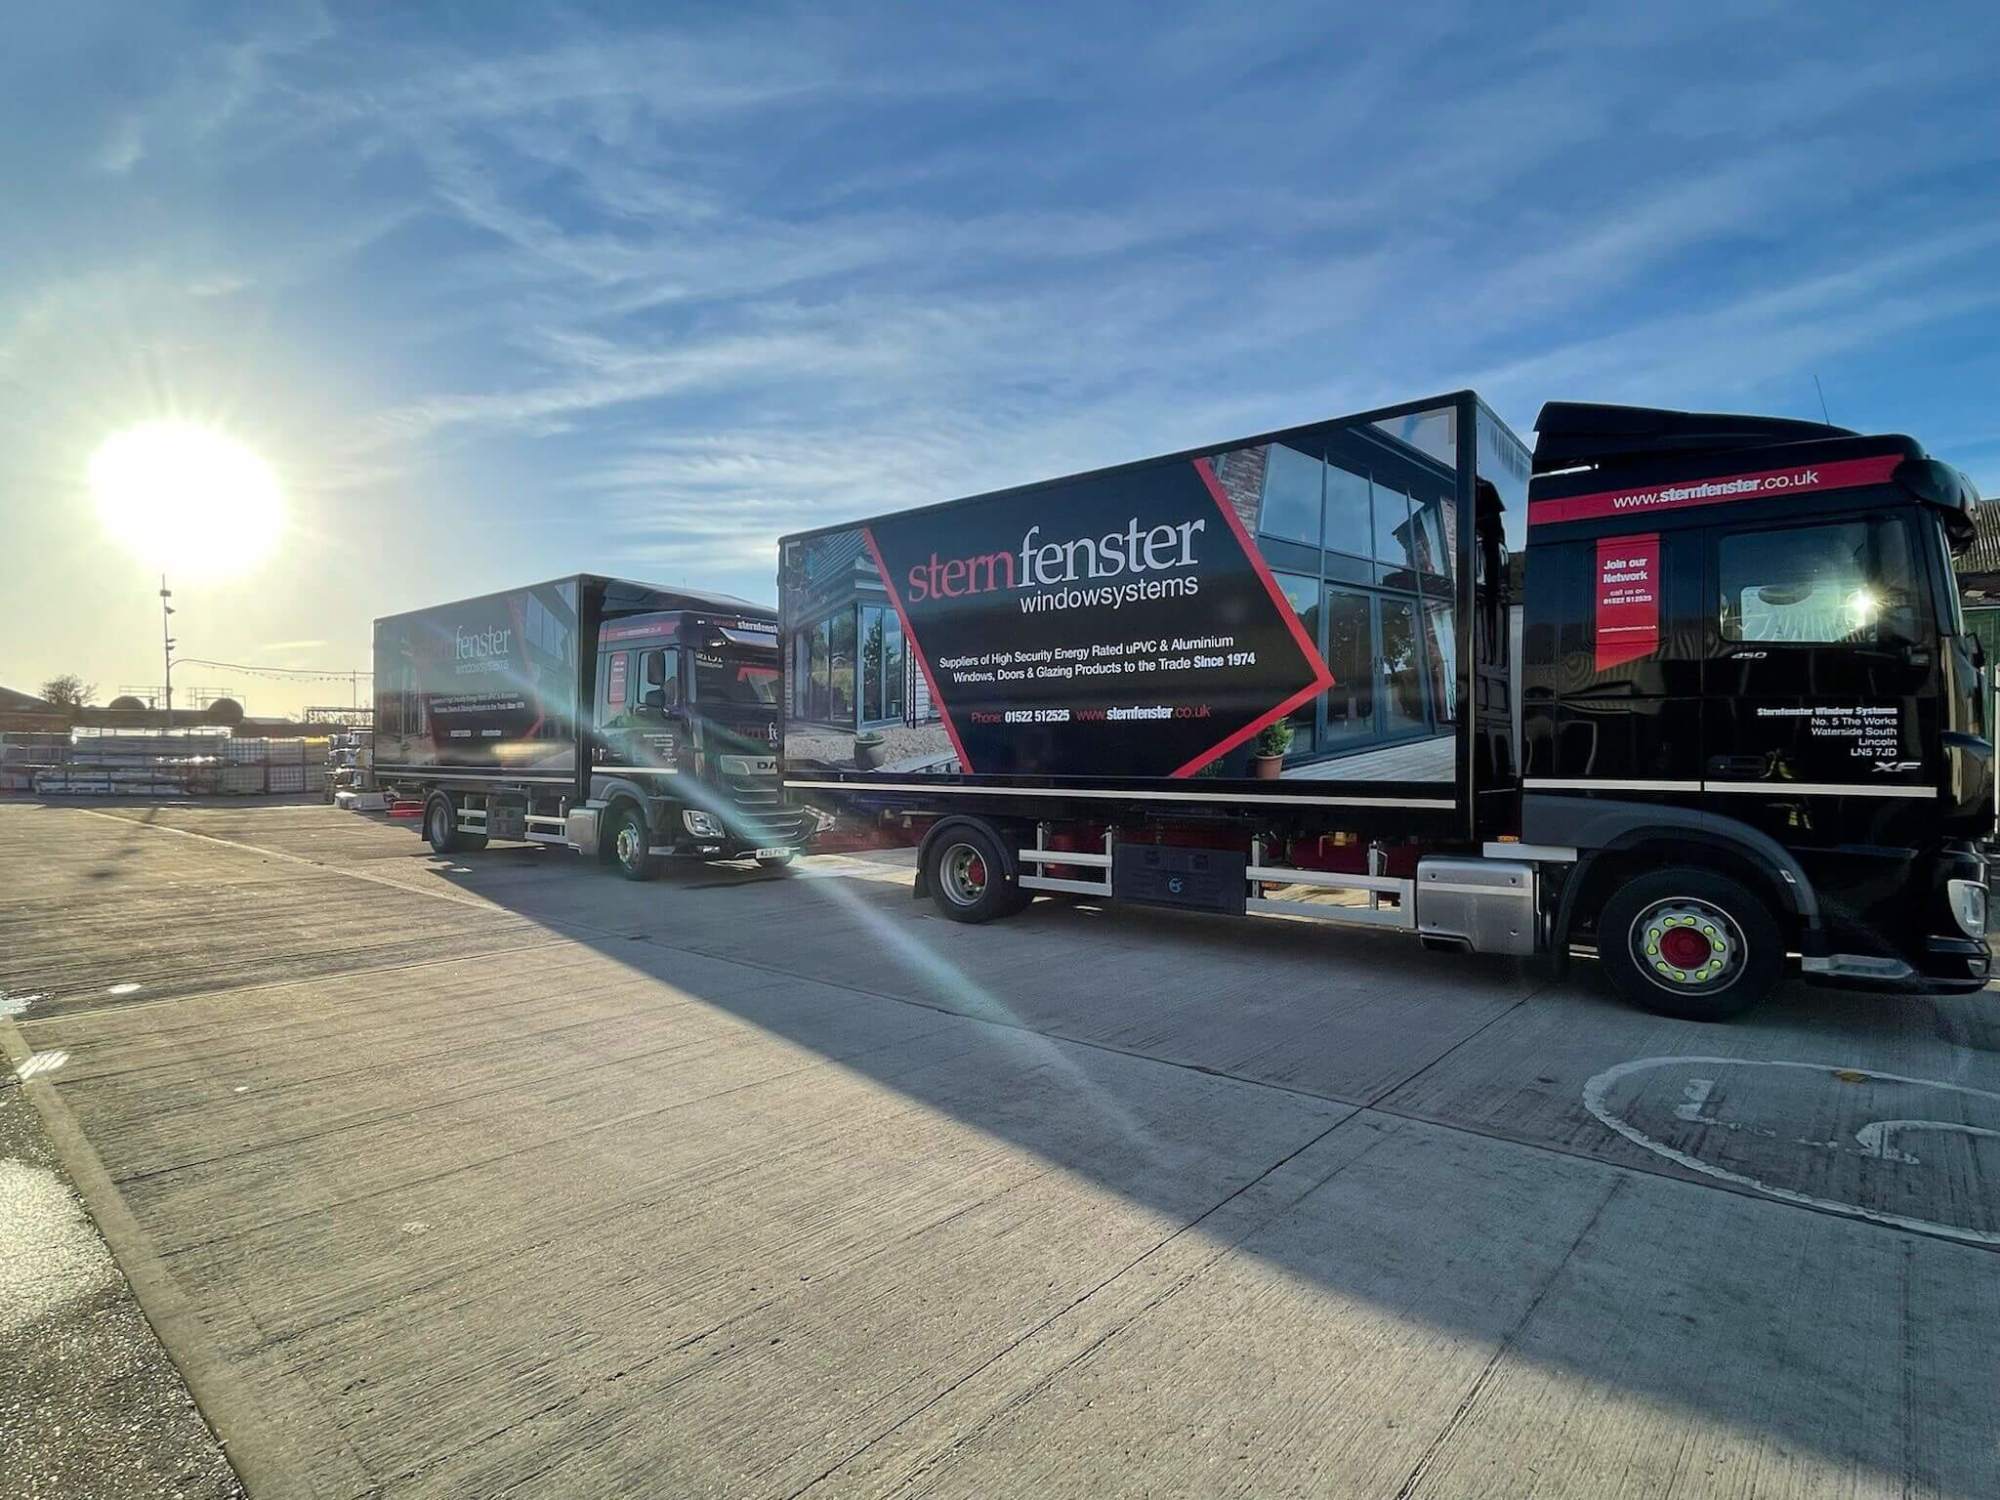 Sternfenster has added four new lorries to is fleet